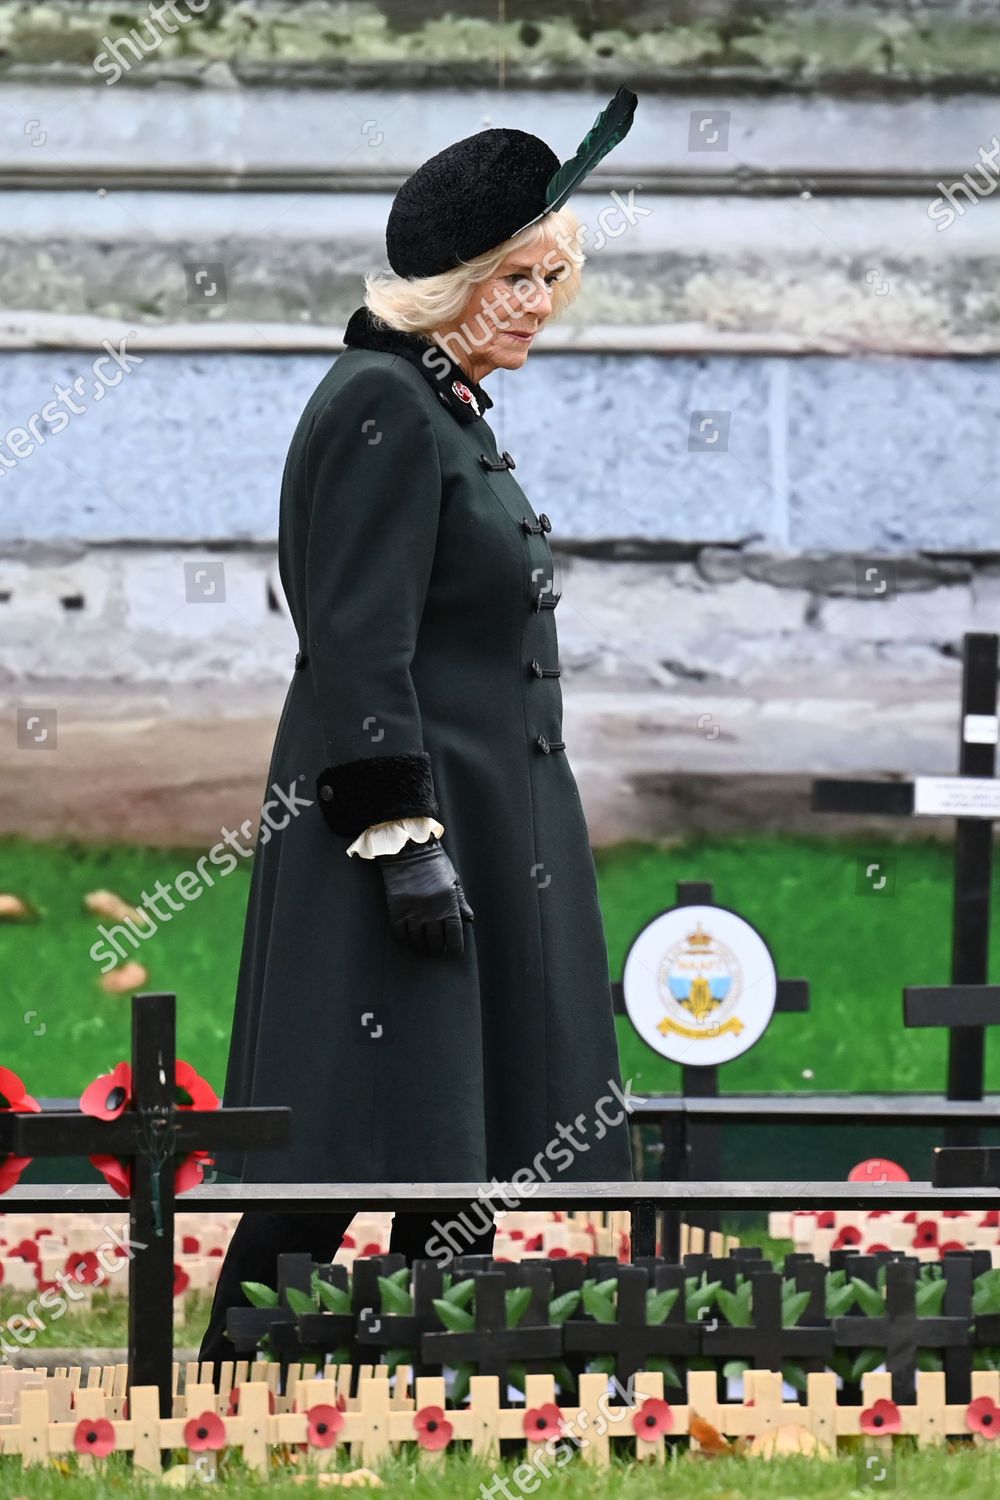 camilla-duchess-of-cornwall-attends-92nd-field-of-remembrance-at-westminster-abbey-london-uk-shutterstock-editorial-10995712y.jpg